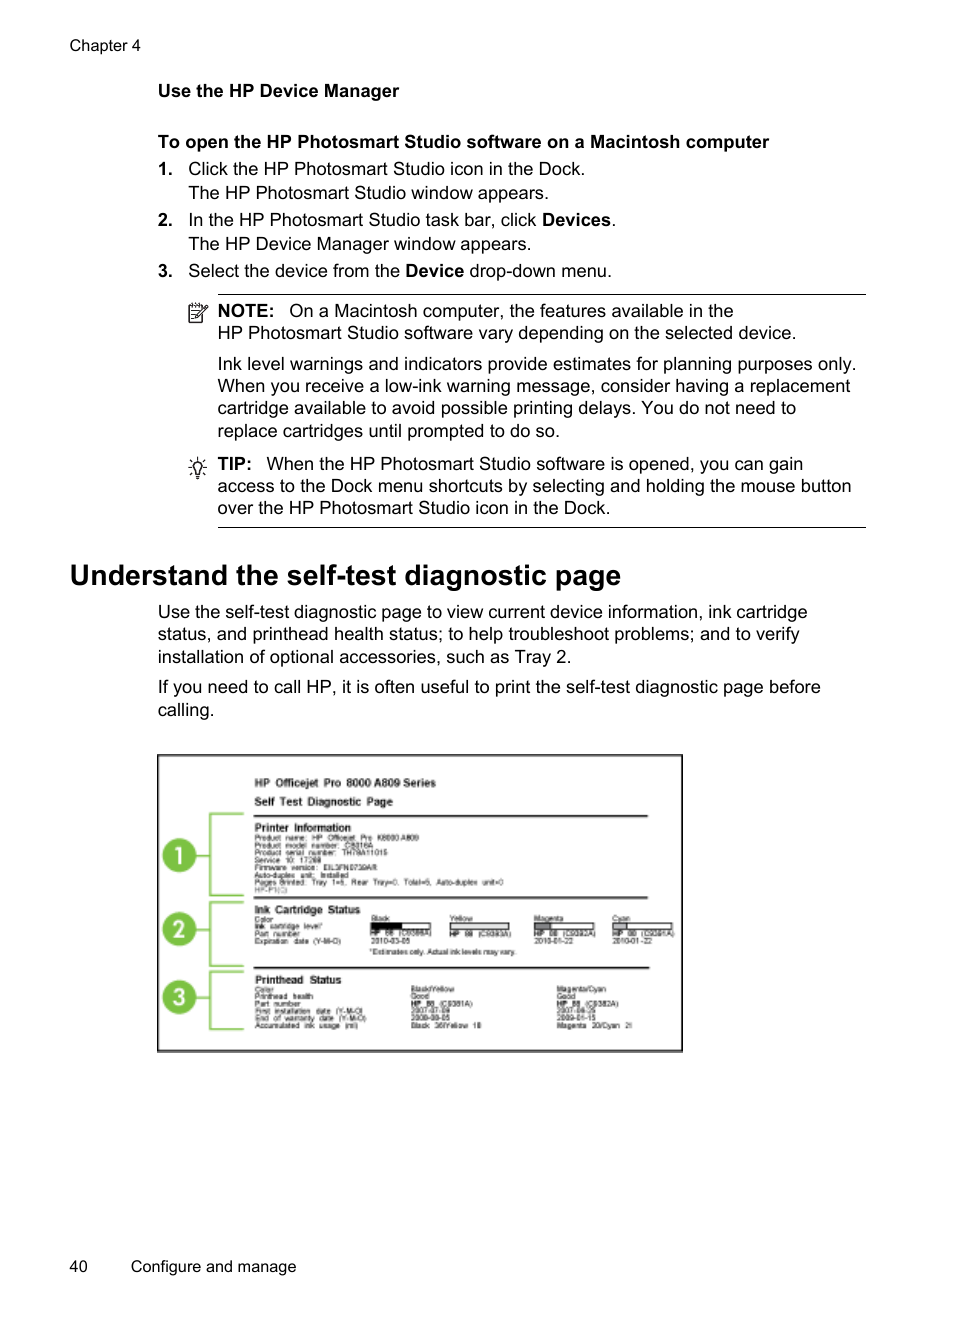 Use the hp device manager, Understand the self-test diagnostic page | HP Officejet Pro 8000 - A809 User Manual | Page 44 / 140